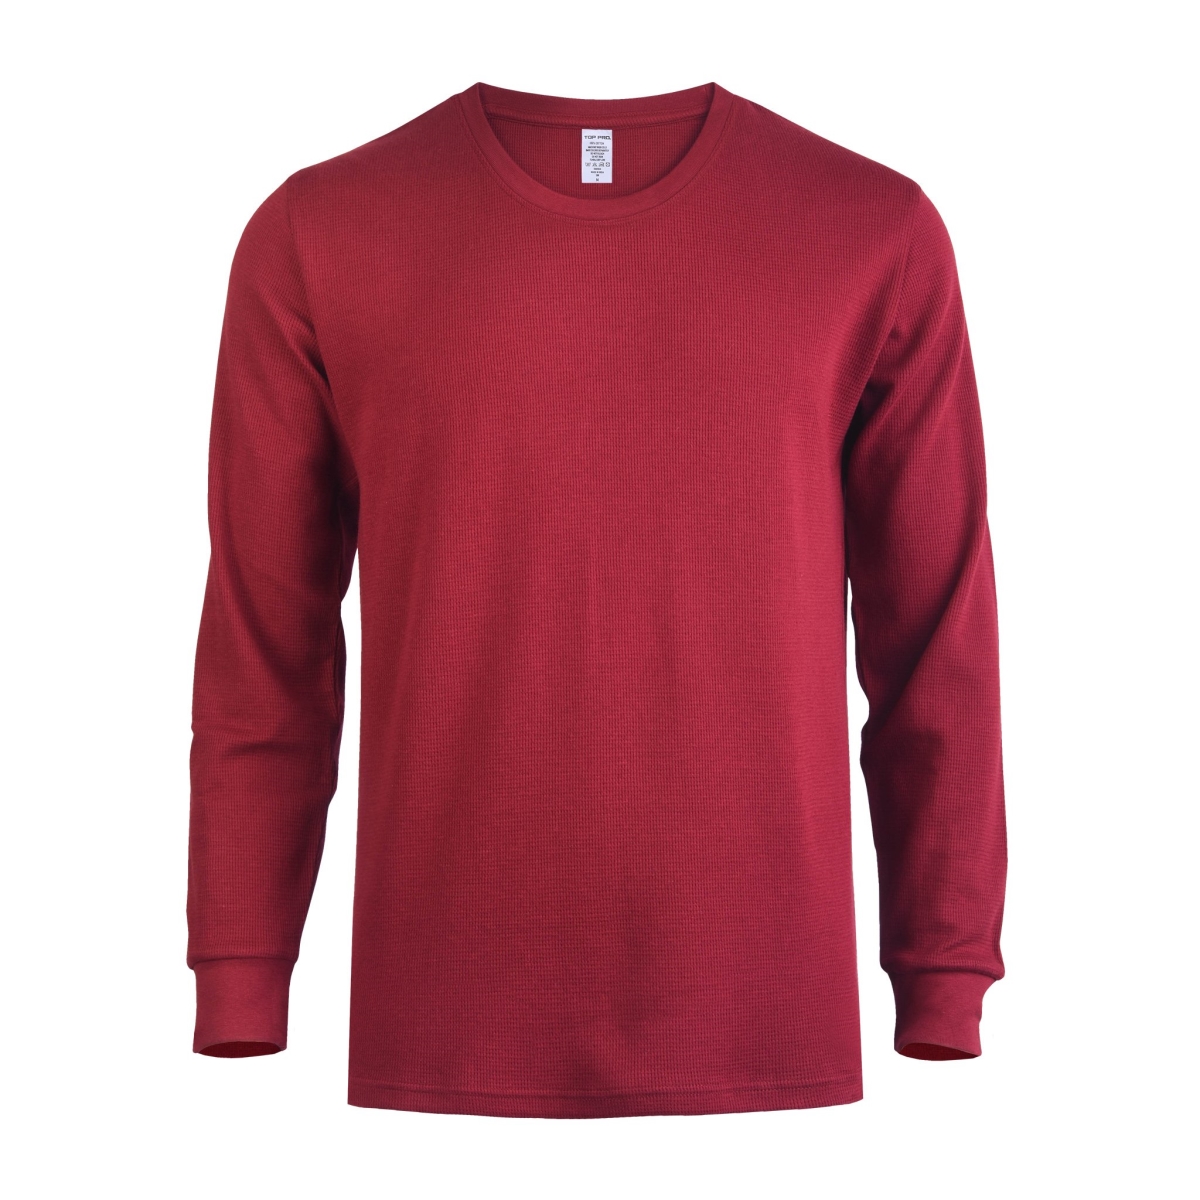 Picture of 247 Frenzy 247-KHT001 BUR-MD Mens Essentials Knocker Classic Breathable Cotton Waffle Knit Texture Thermal Top Long Sleeve T-Shirt&#44; Burgundy - Medium